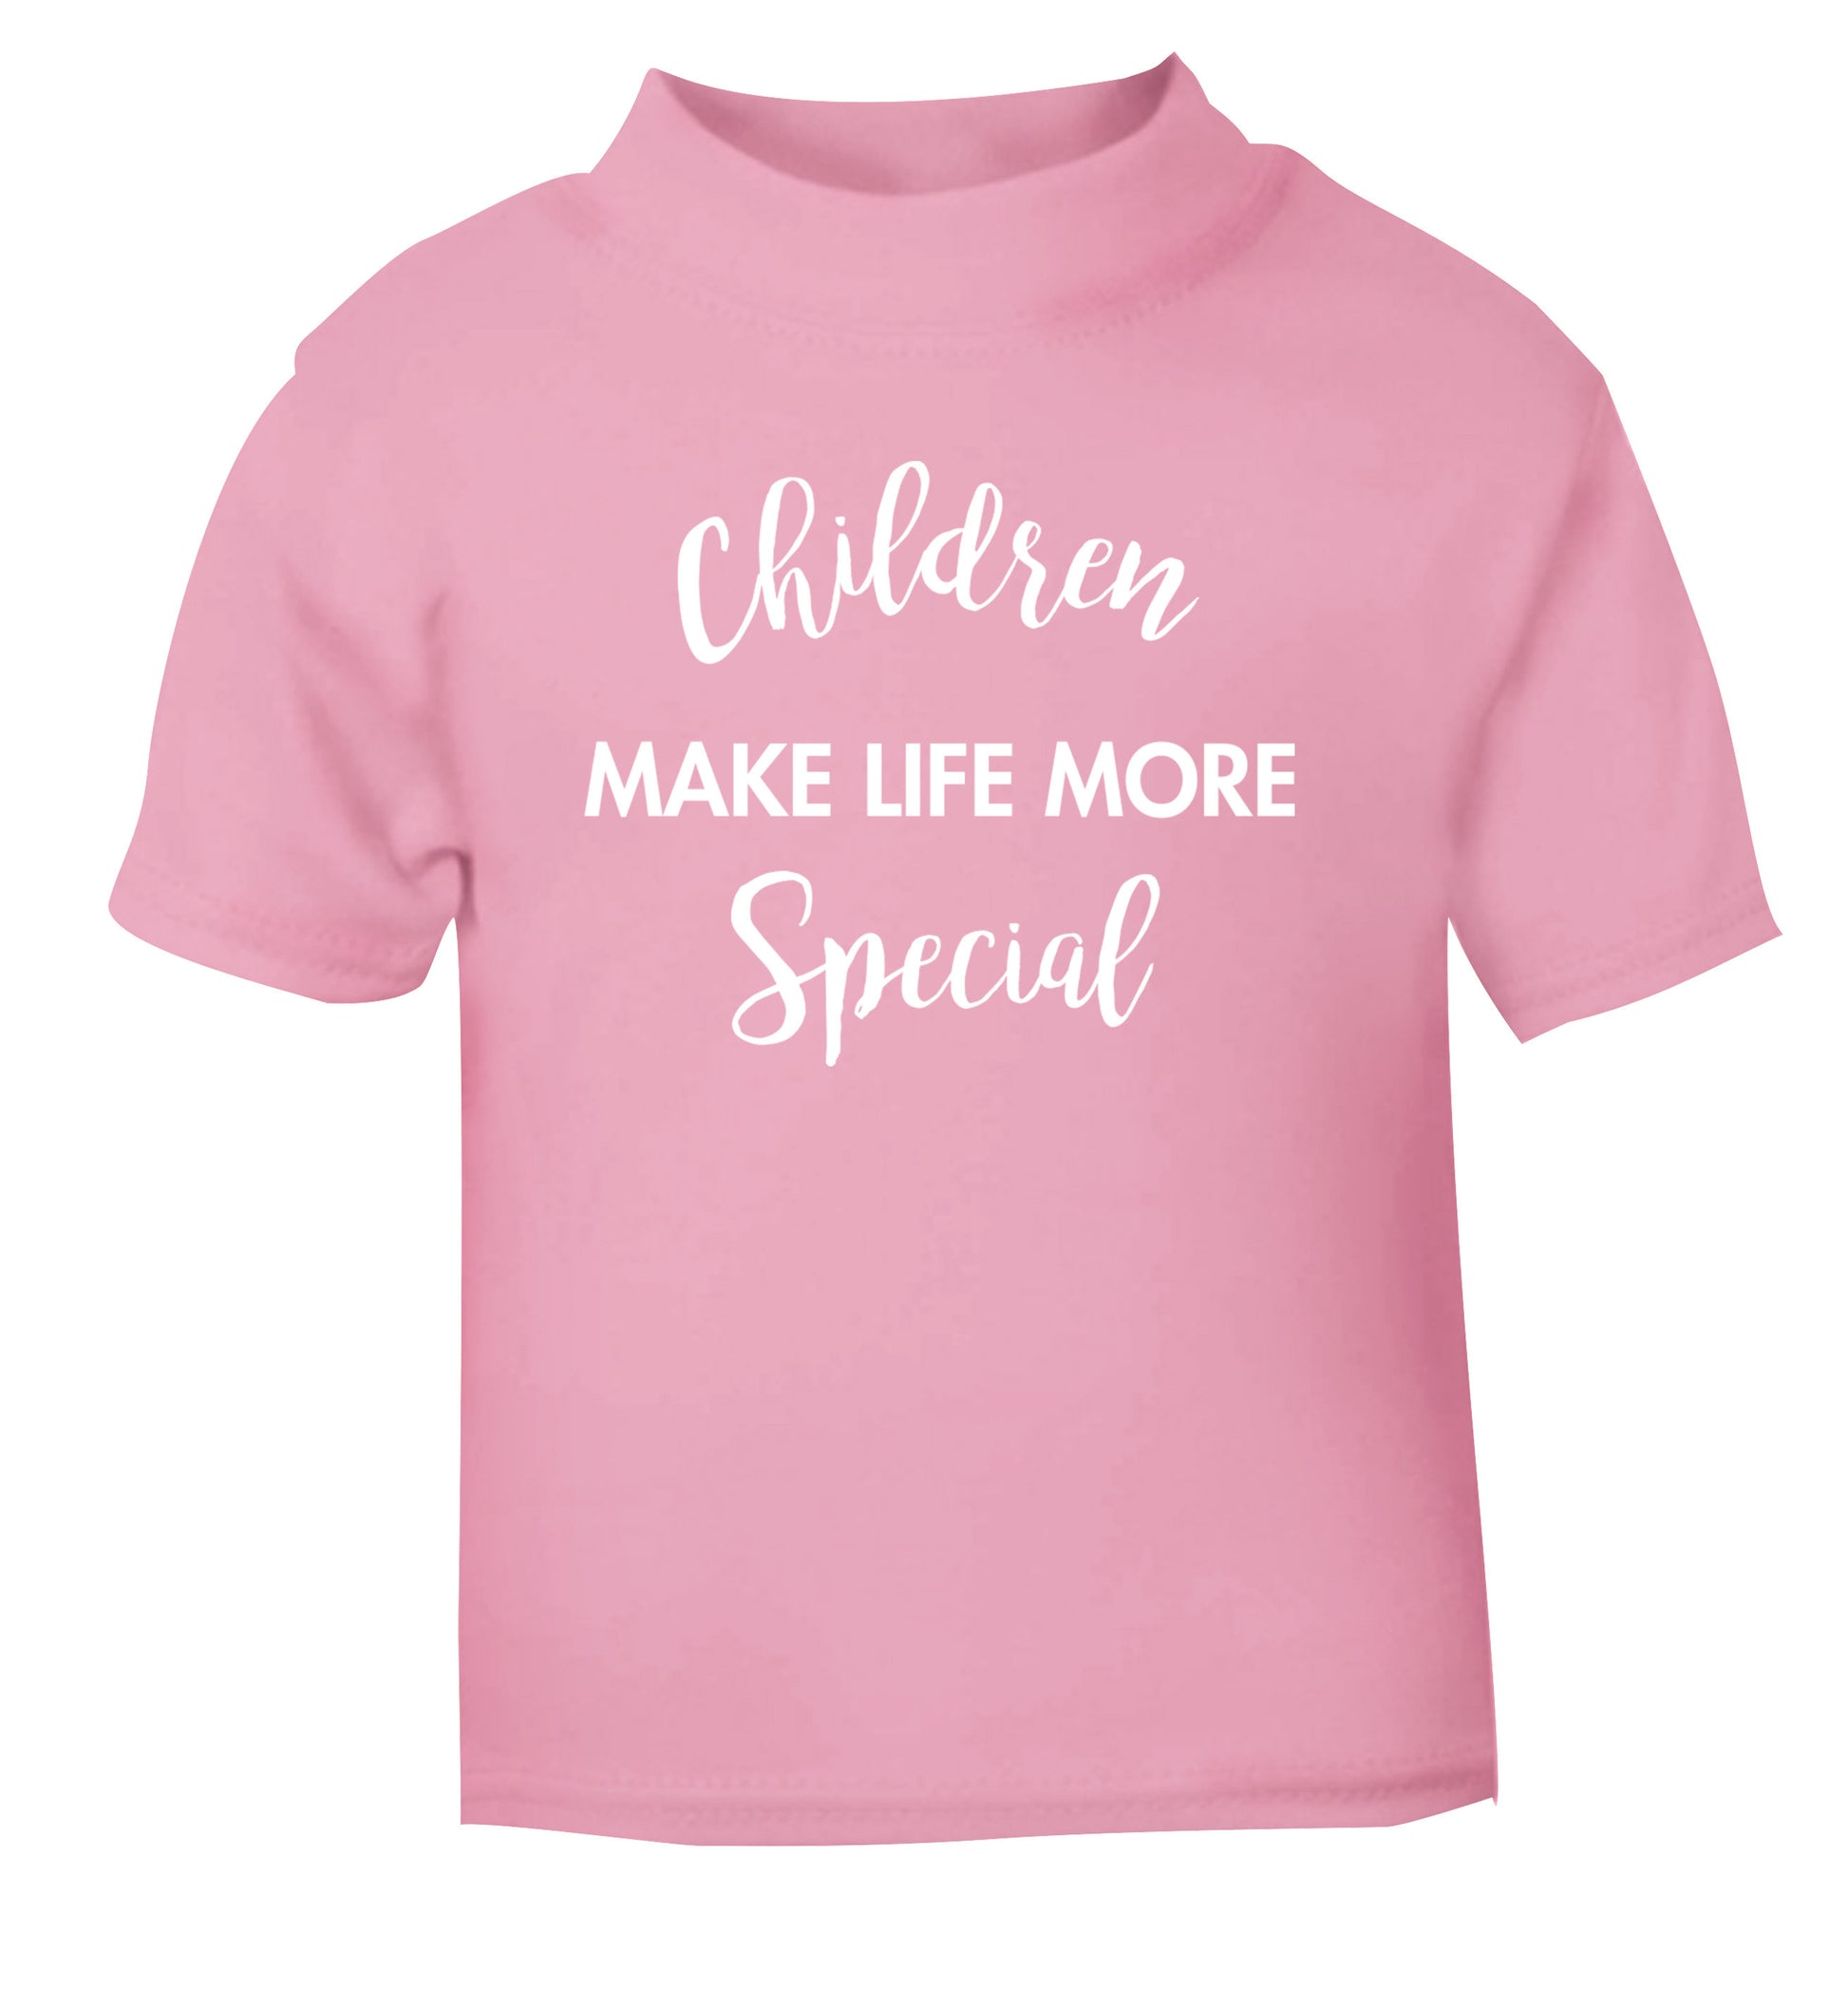 Children make life more special light pink Baby Toddler Tshirt 2 Years